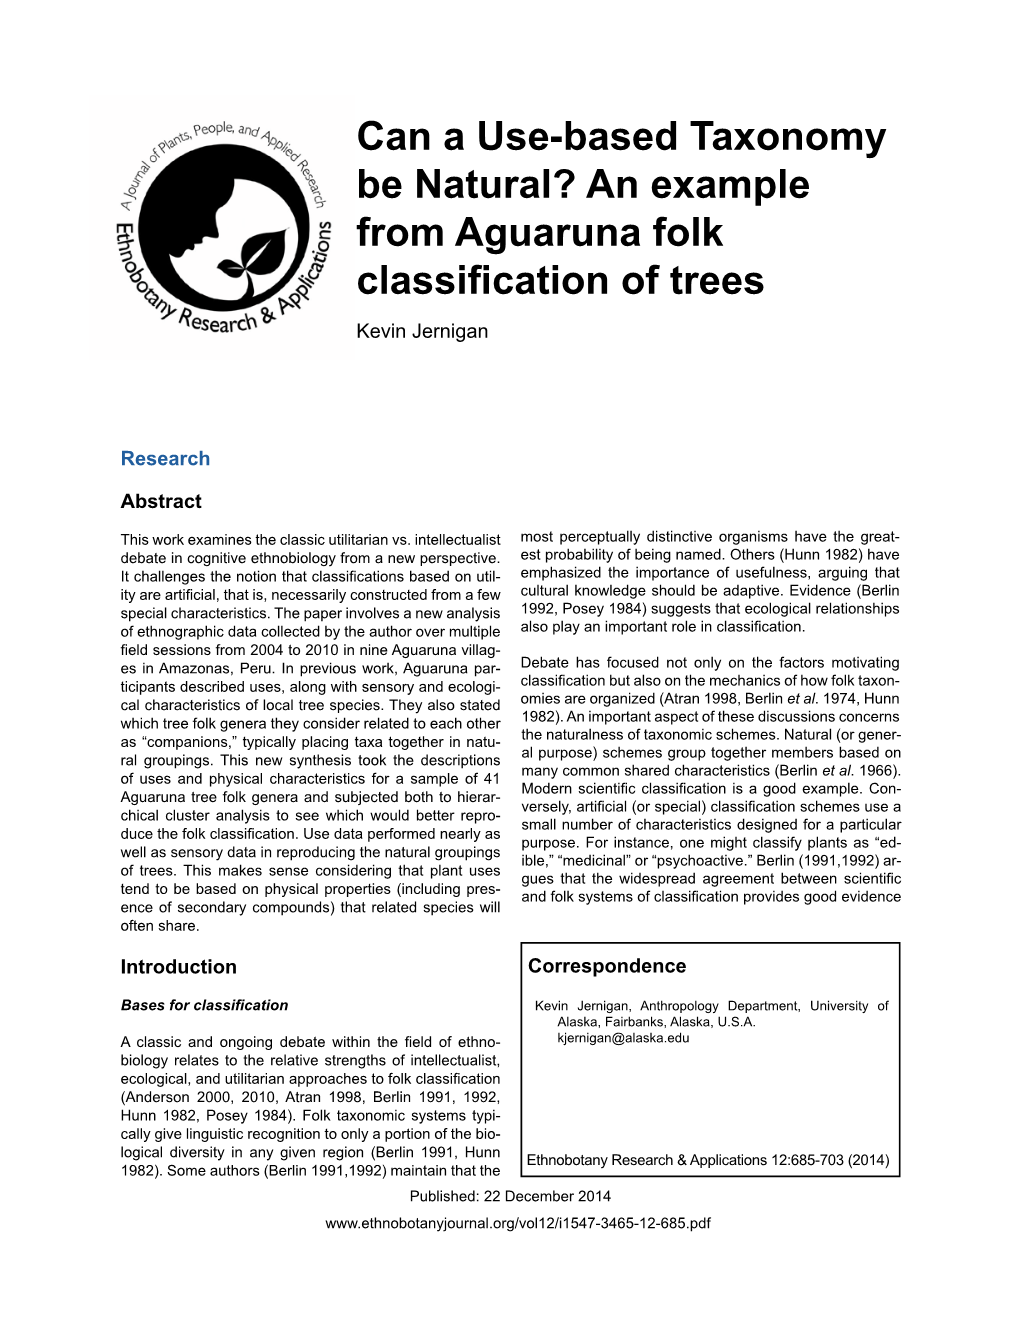 Can a Use-Based Taxonomy Be Natural? an Example from Aguaruna Folk Classification of Trees Kevin Jernigan